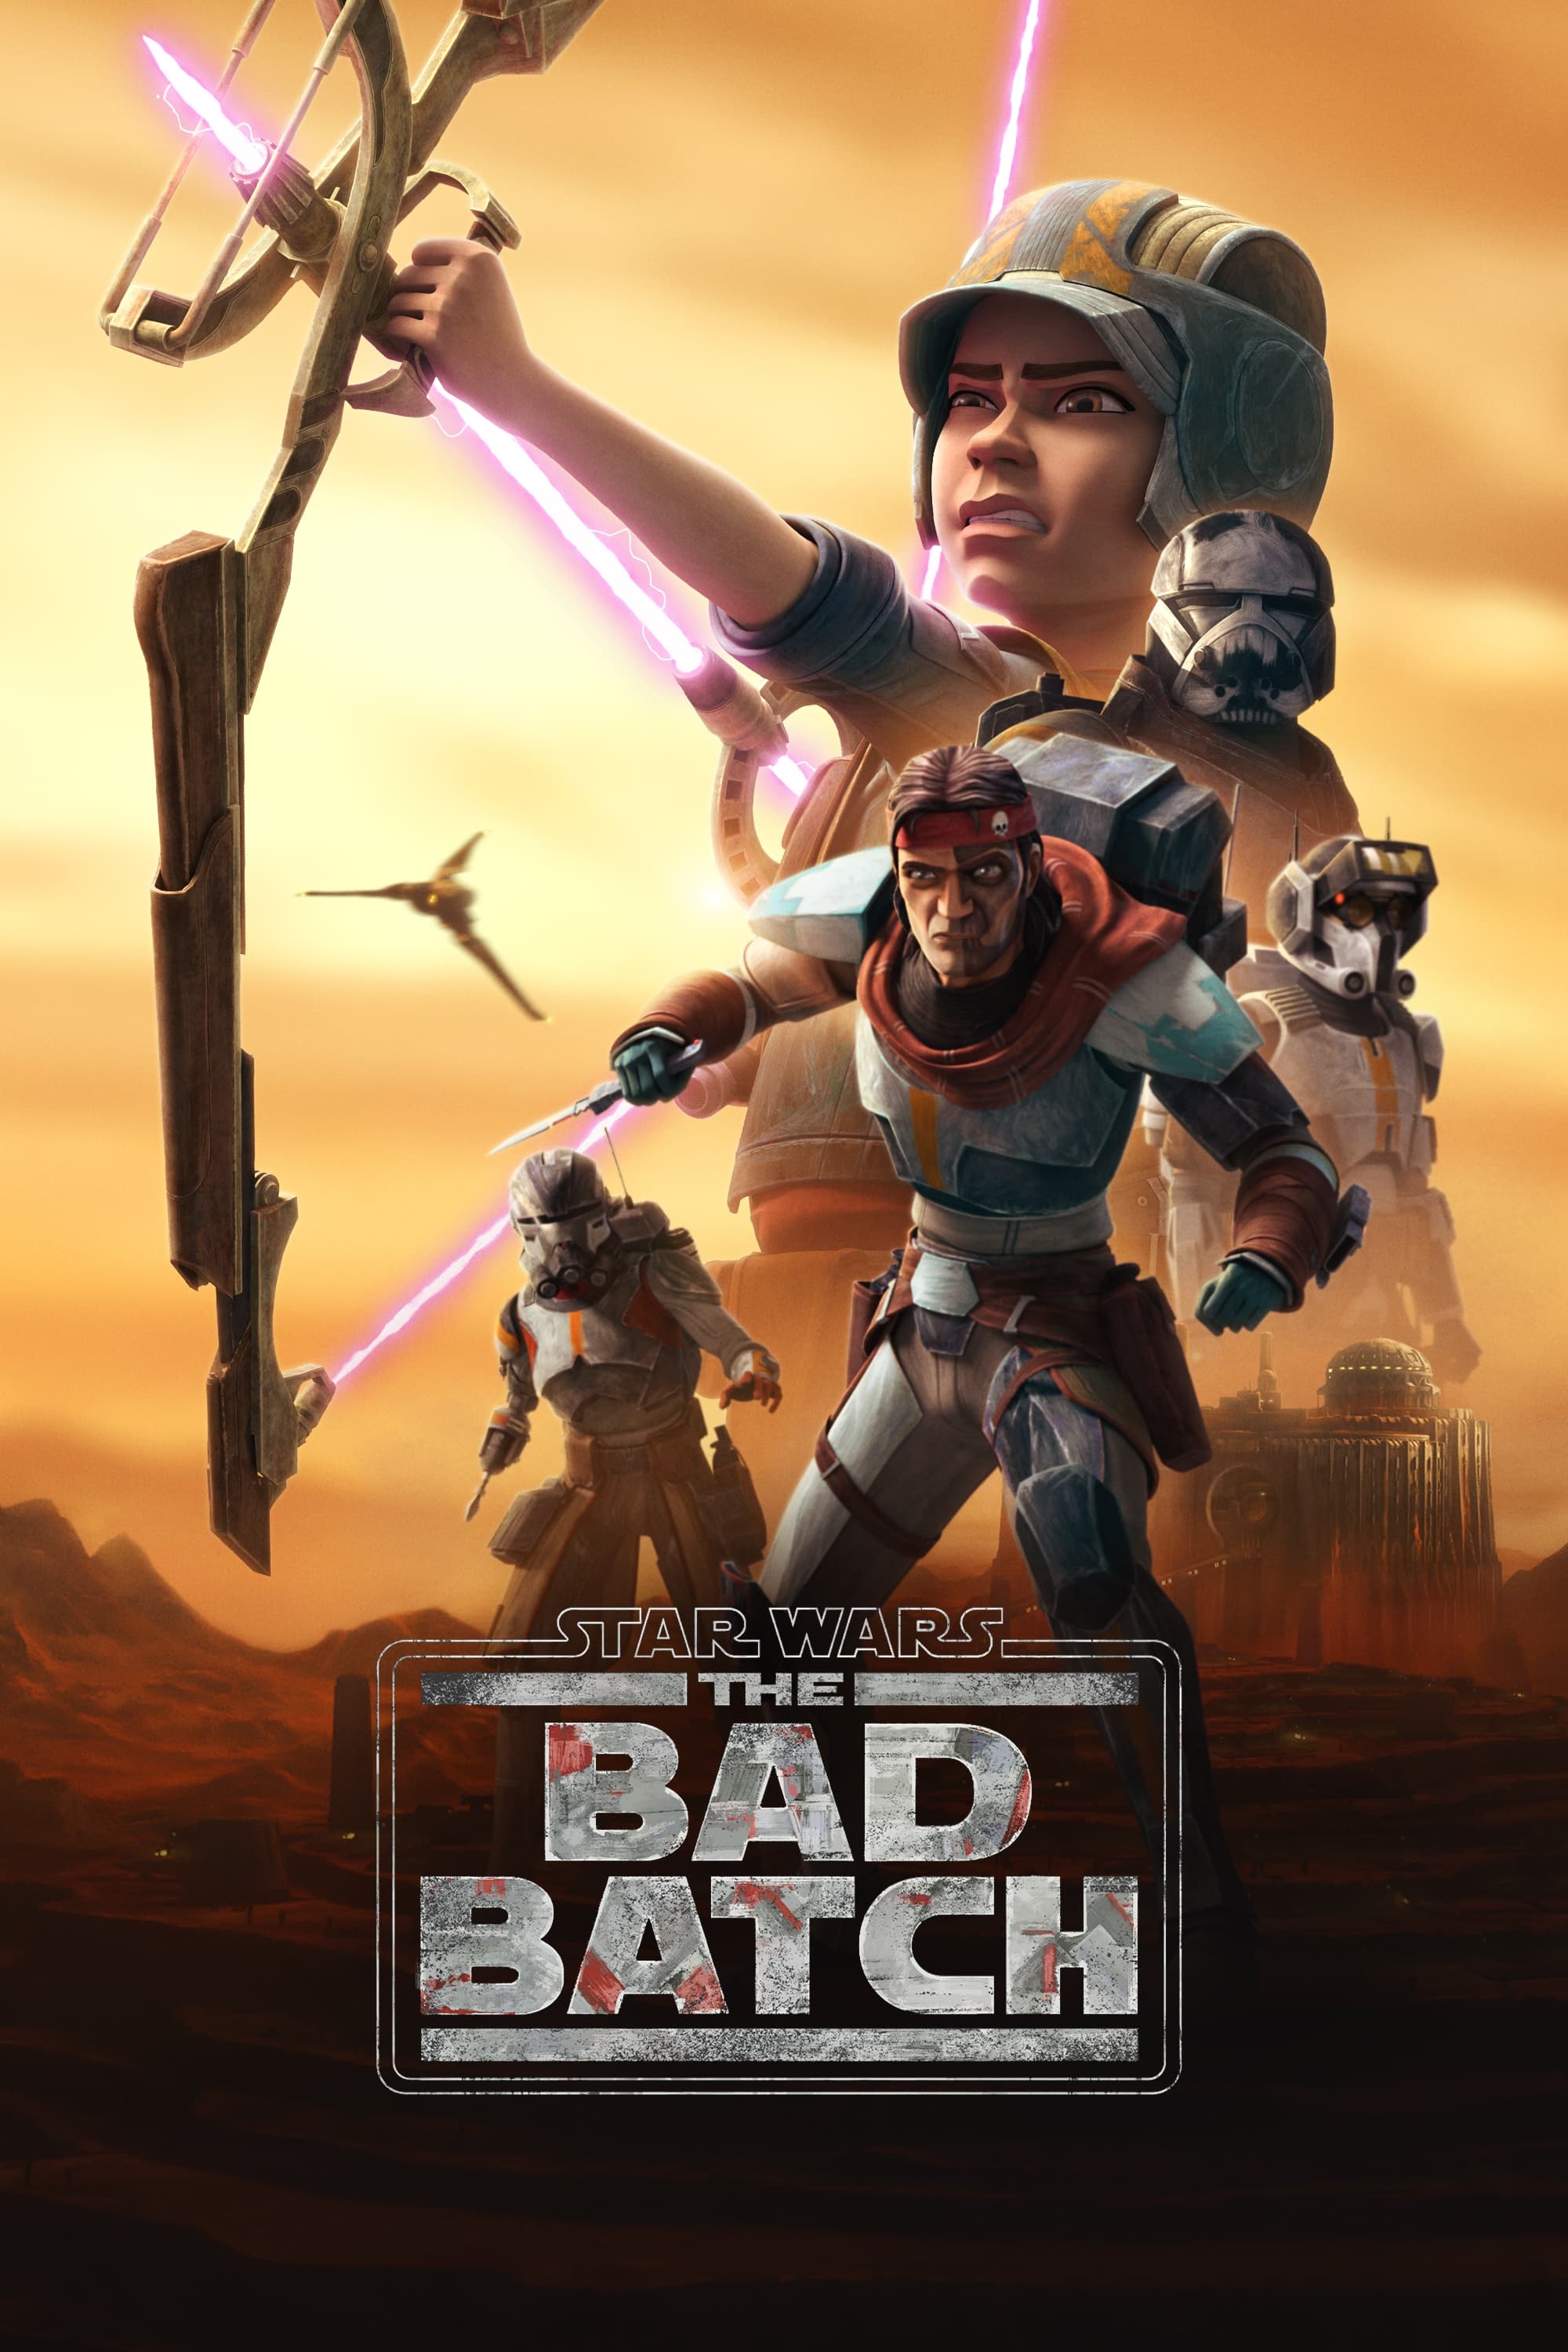 Star Wars: The Bad Batch TV Shows About Military